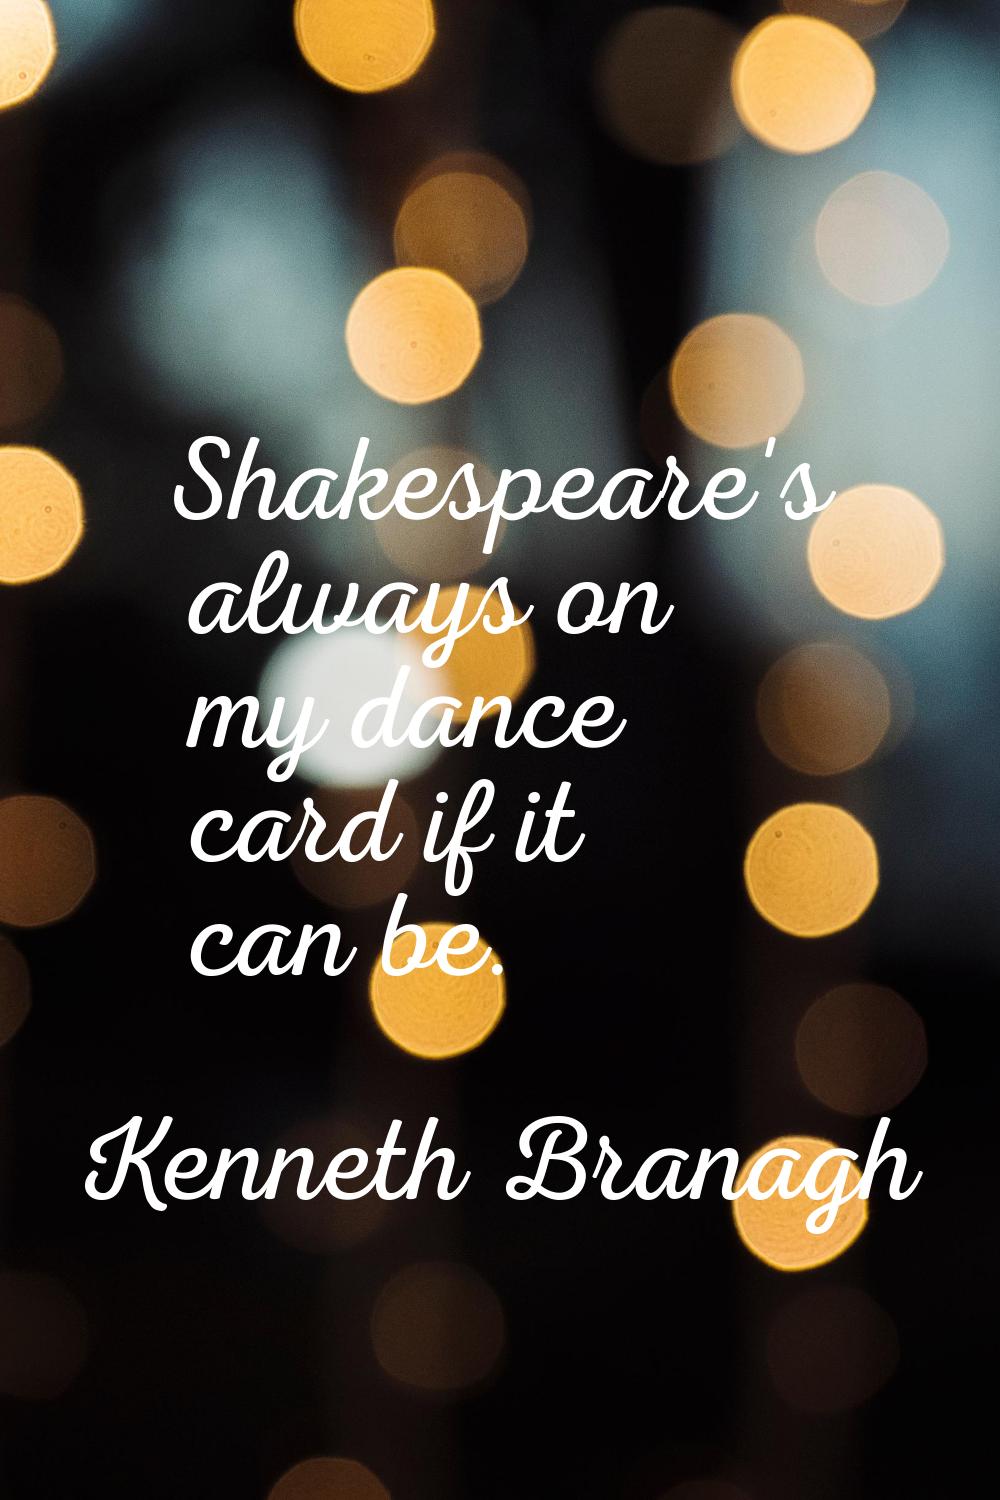 Shakespeare's always on my dance card if it can be.